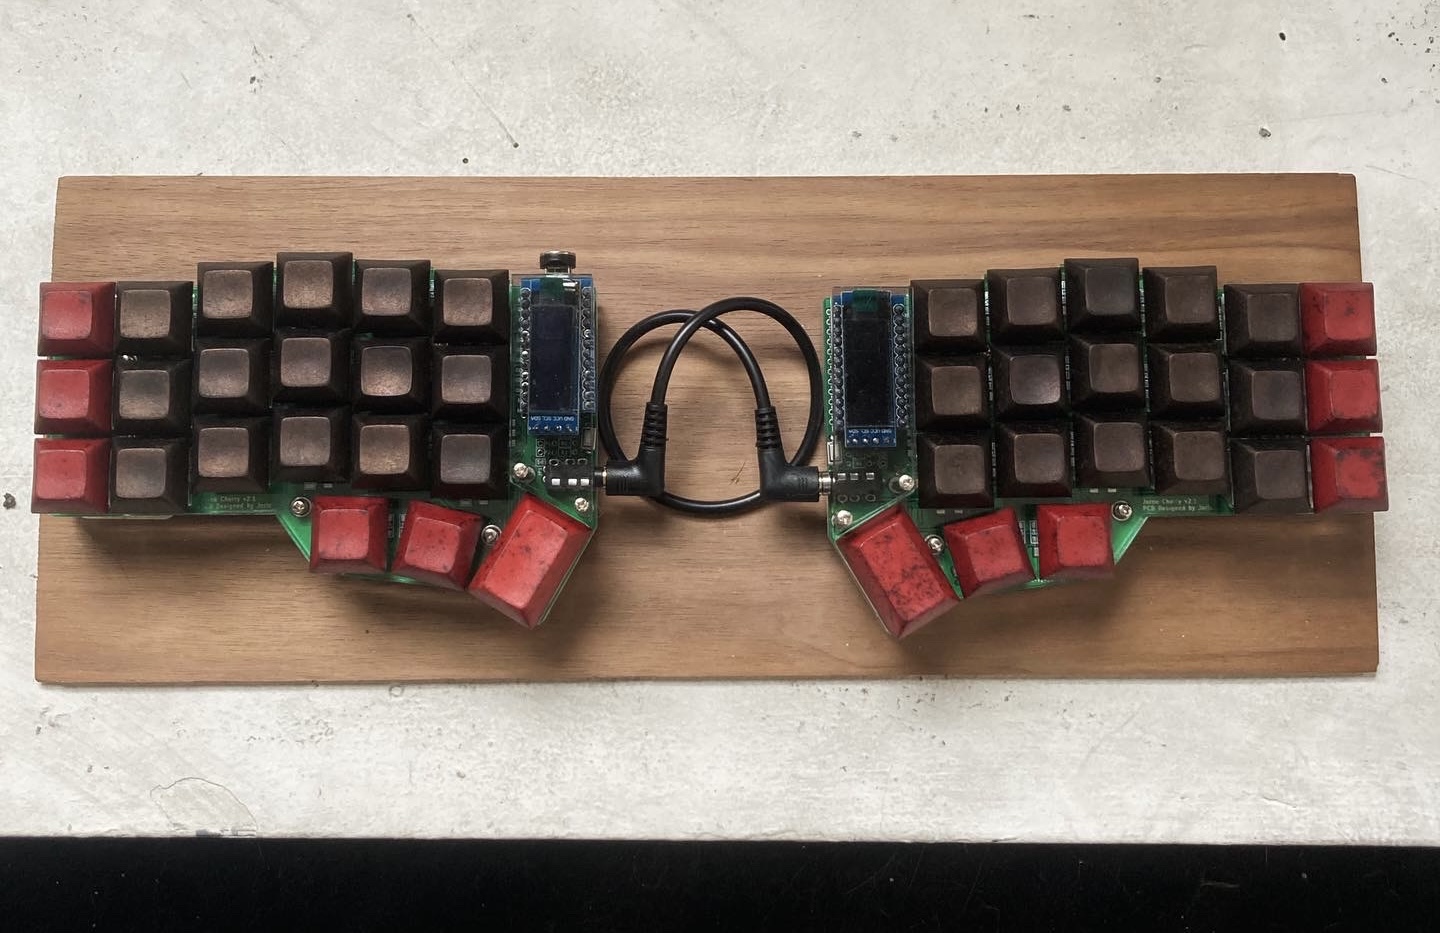 Bronze and red keycaps on a crkbd split ergonomic keyboard.